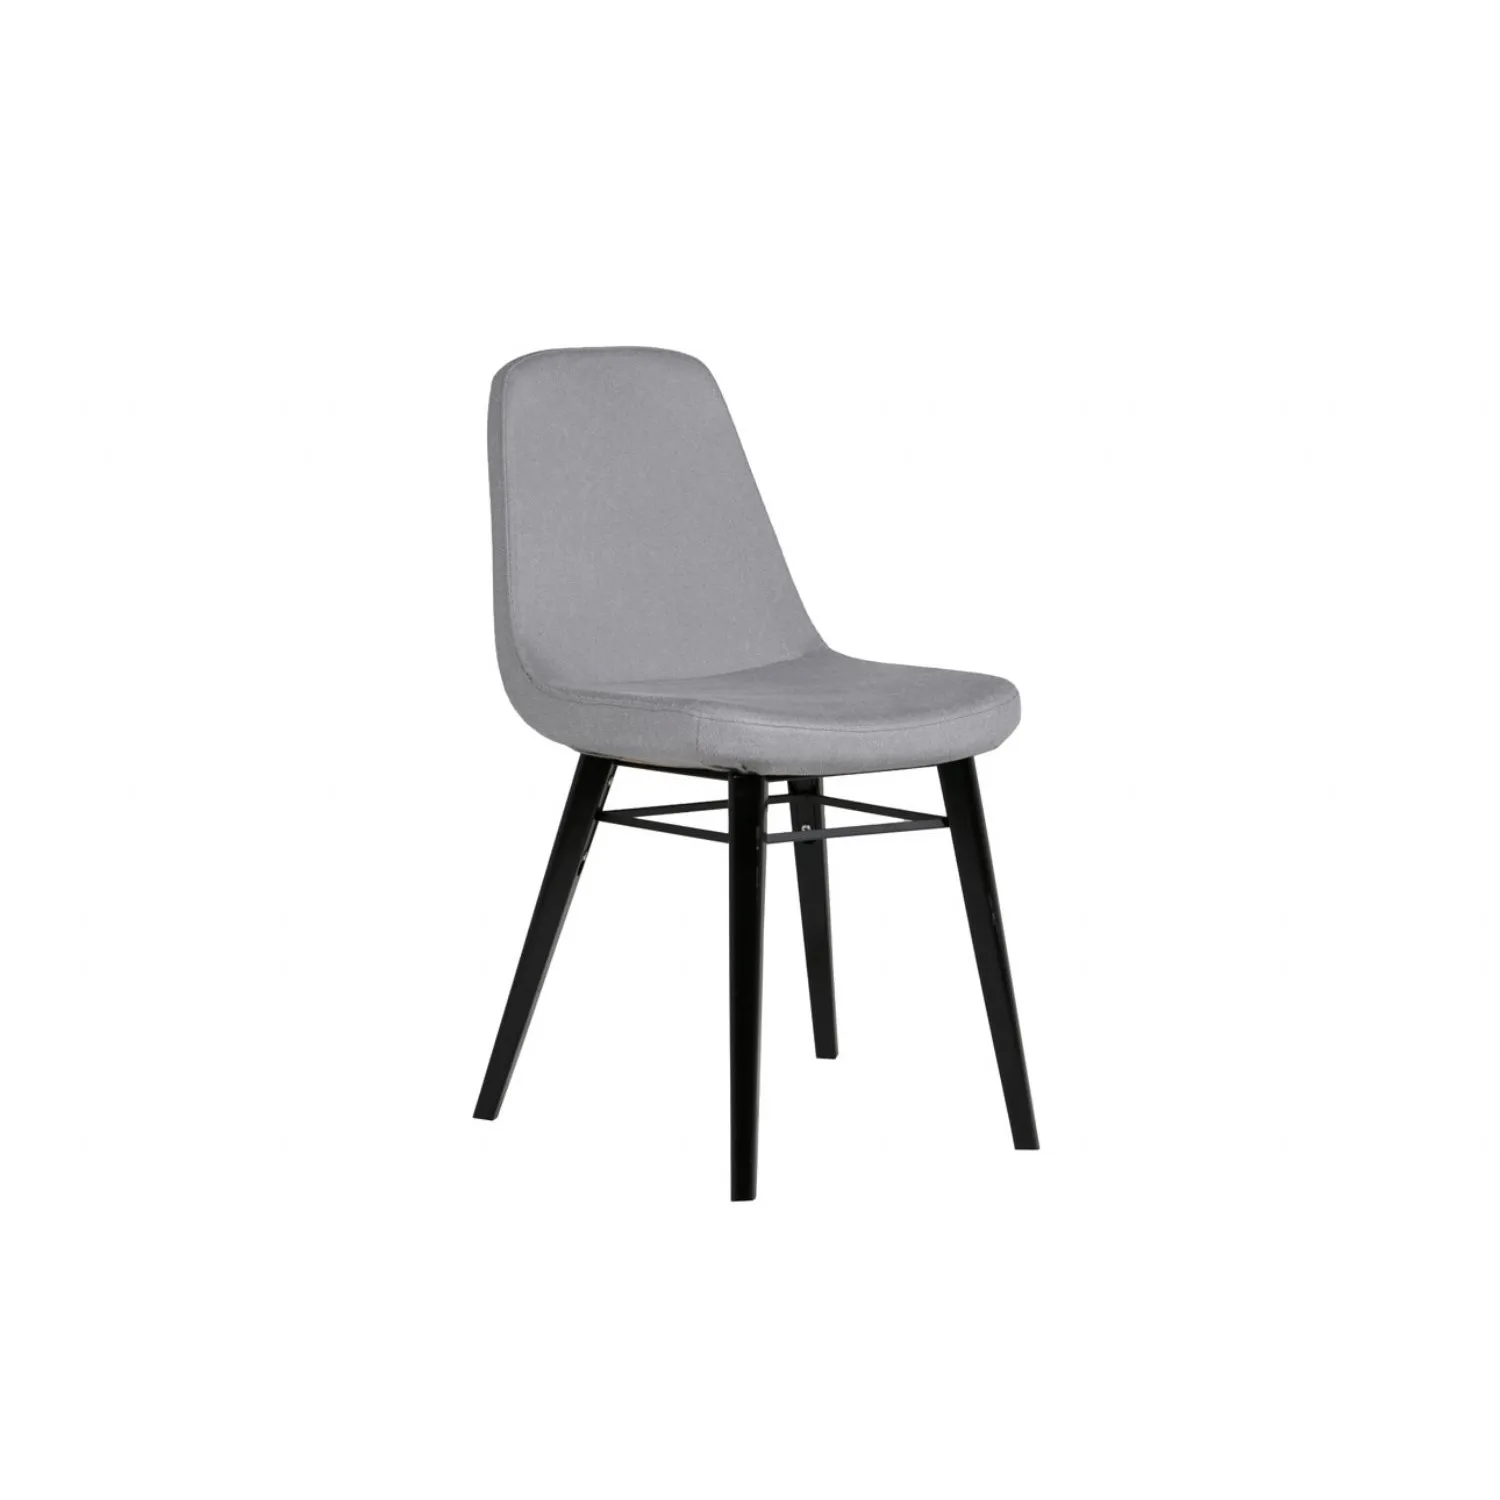 Grey Fabric Upholstered Dining Chair Wooden Legs